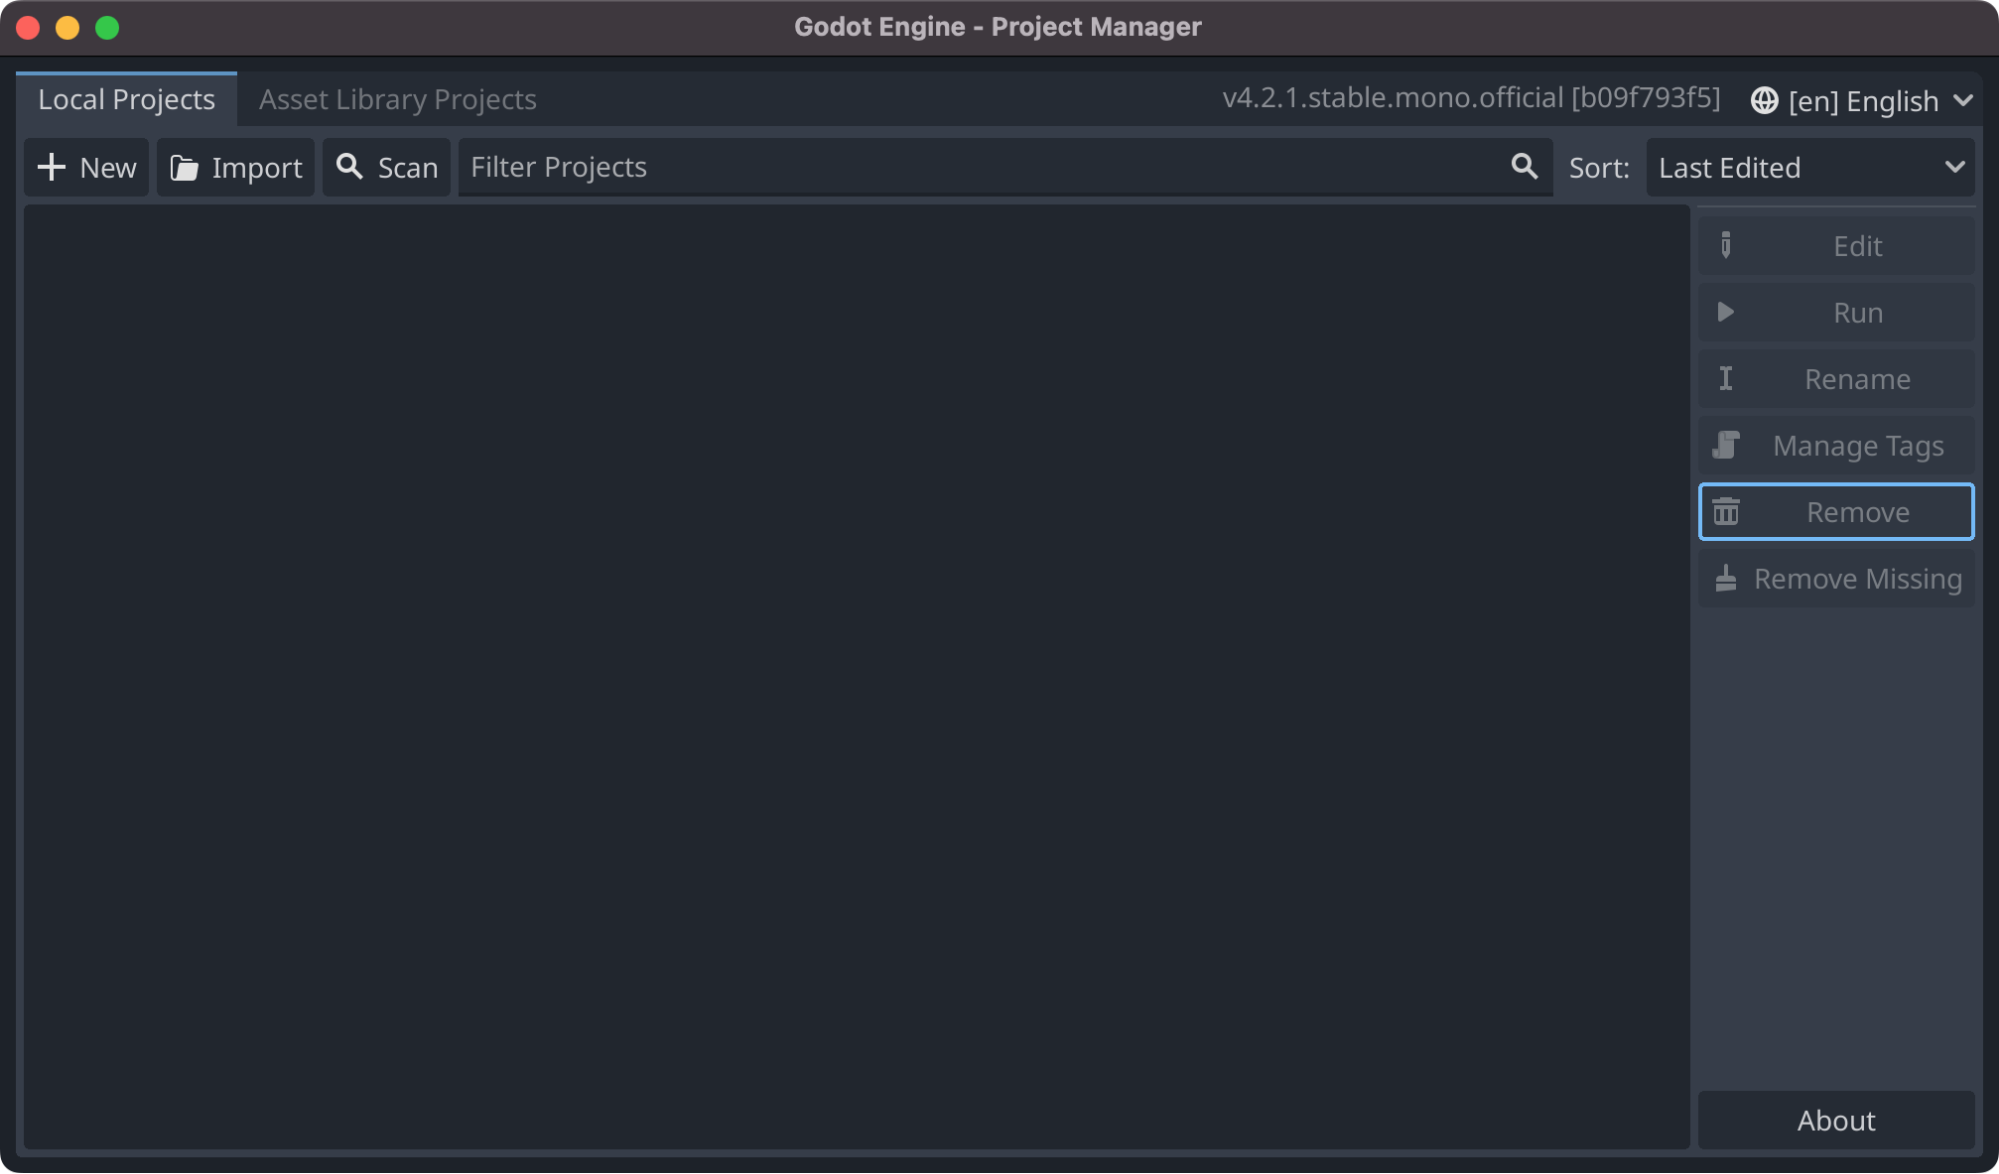 Godot Game Engine project manager screen